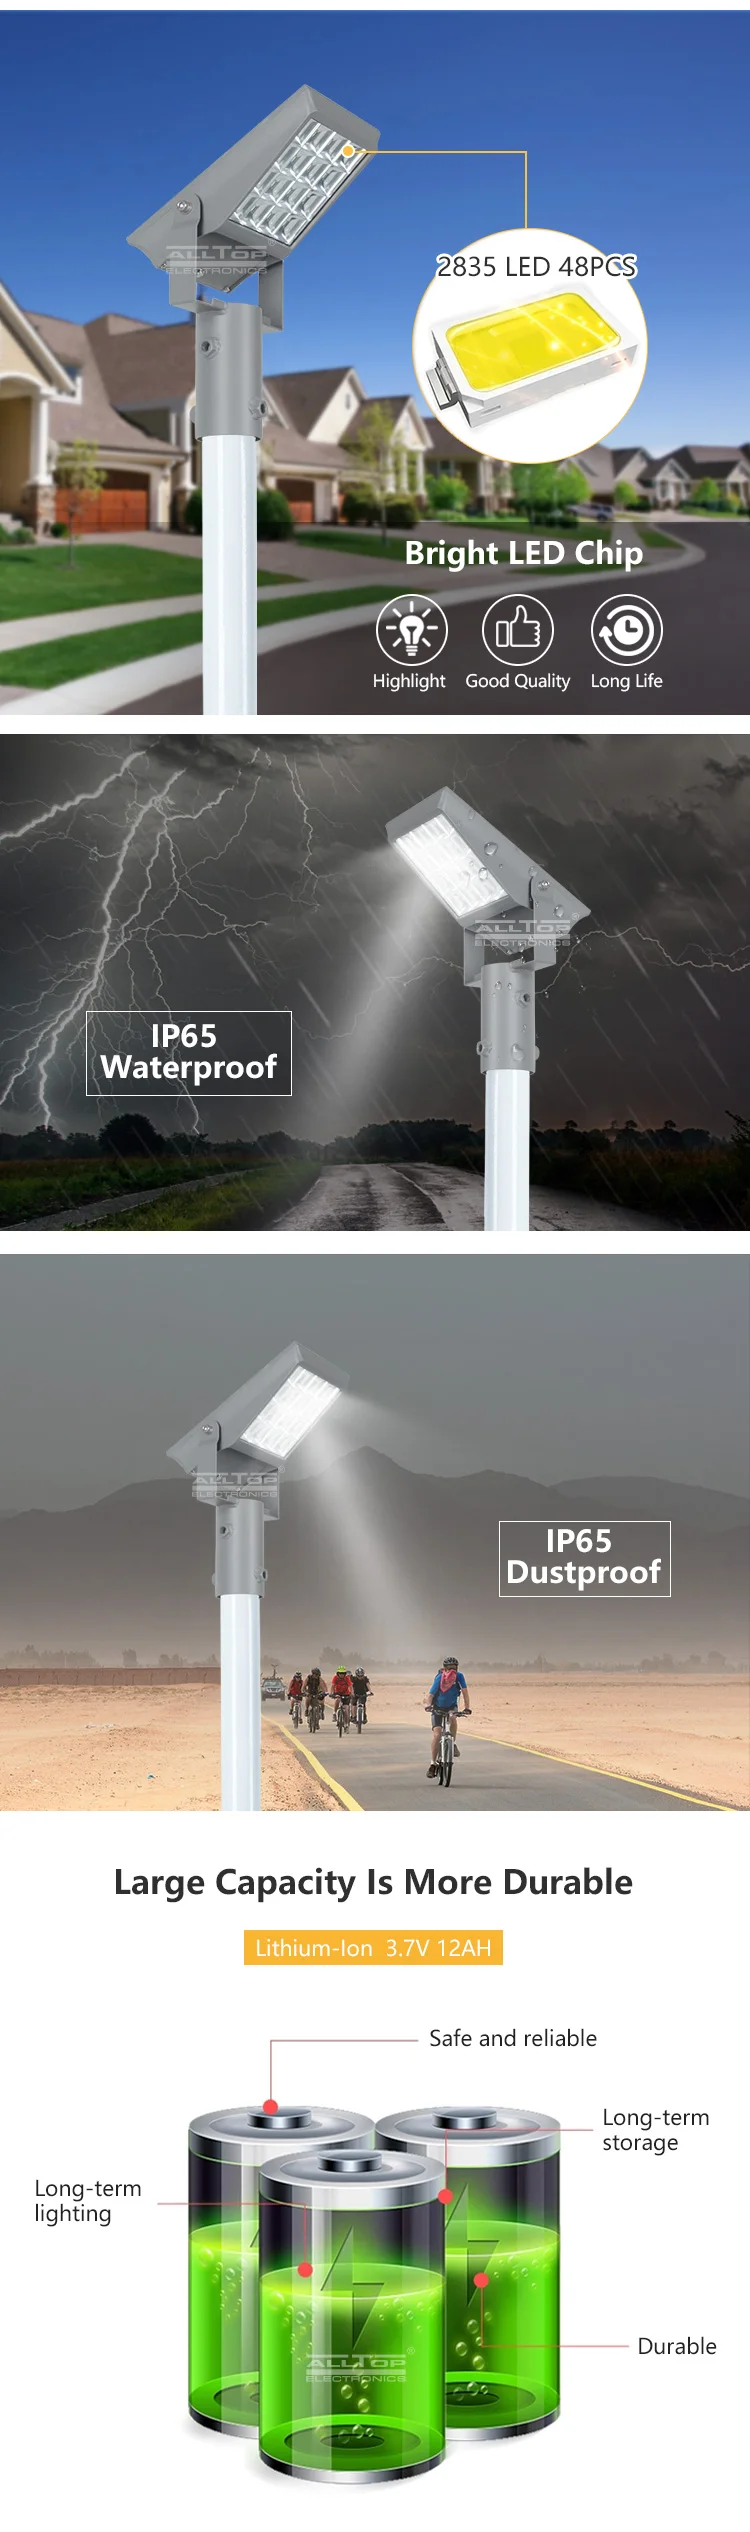 ALLTOP 2020 Newest design waterproof outdoor 8w 12w integrated all in one solar led flood light